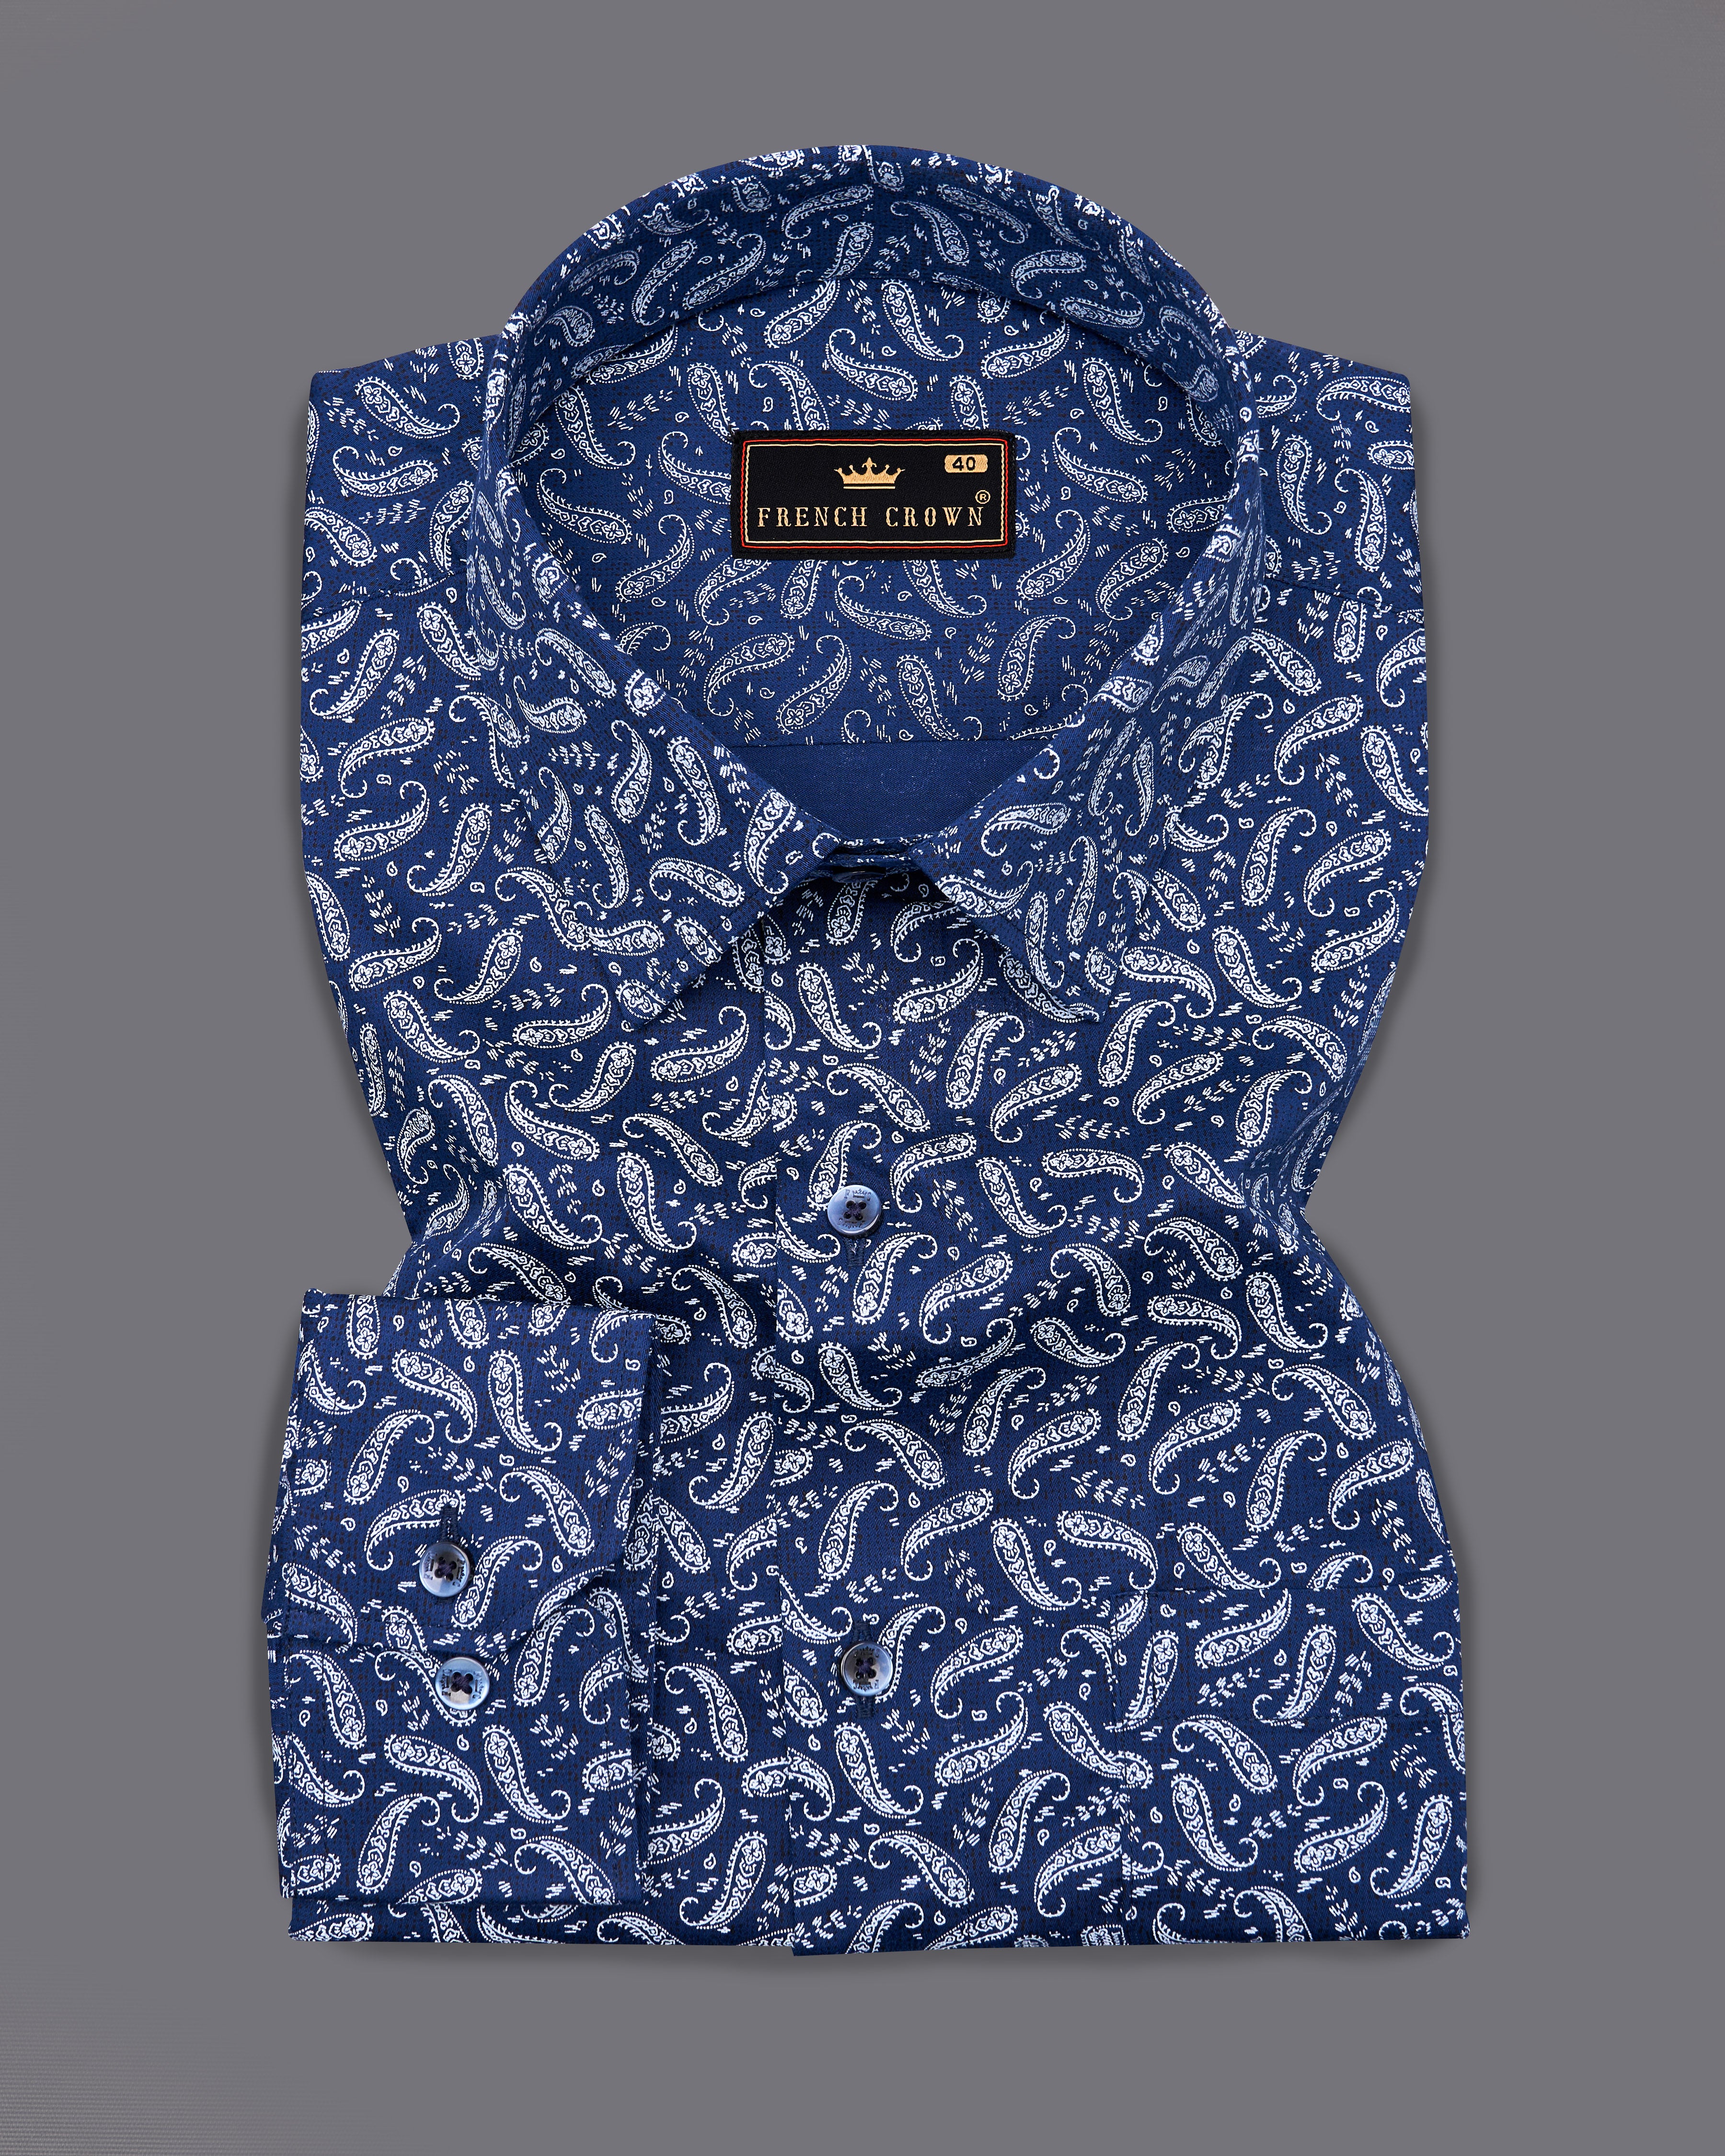 Biscay Blue Paisley Textured Royal Oxford Shirt 9261-BLE-38,9261-BLE-H-38,9261-BLE-39,9261-BLE-H-39,9261-BLE-40,9261-BLE-H-40,9261-BLE-42,9261-BLE-H-42,9261-BLE-44,9261-BLE-H-44,9261-BLE-46,9261-BLE-H-46,9261-BLE-48,9261-BLE-H-48,9261-BLE-50,9261-BLE-H-50,9261-BLE-52,9261-BLE-H-52